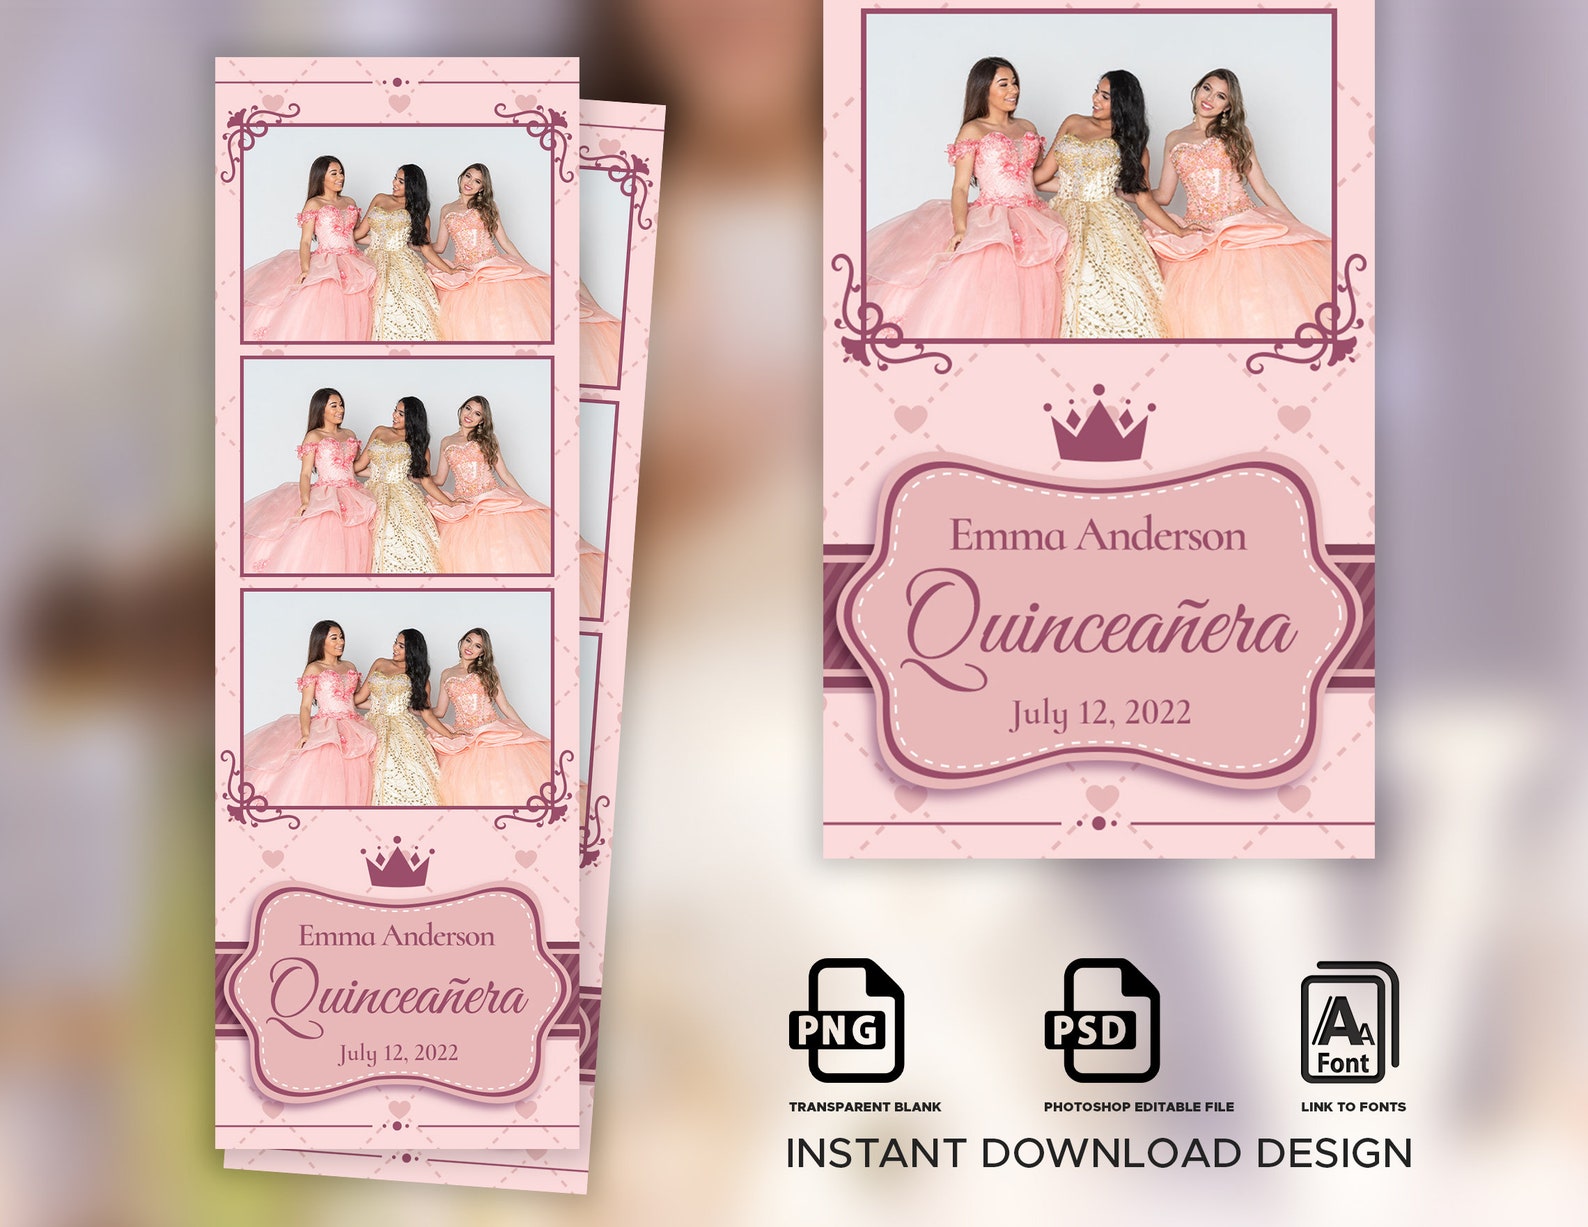 photo-booth-template-quinceanera-quinceanera-photo-booth-etsy